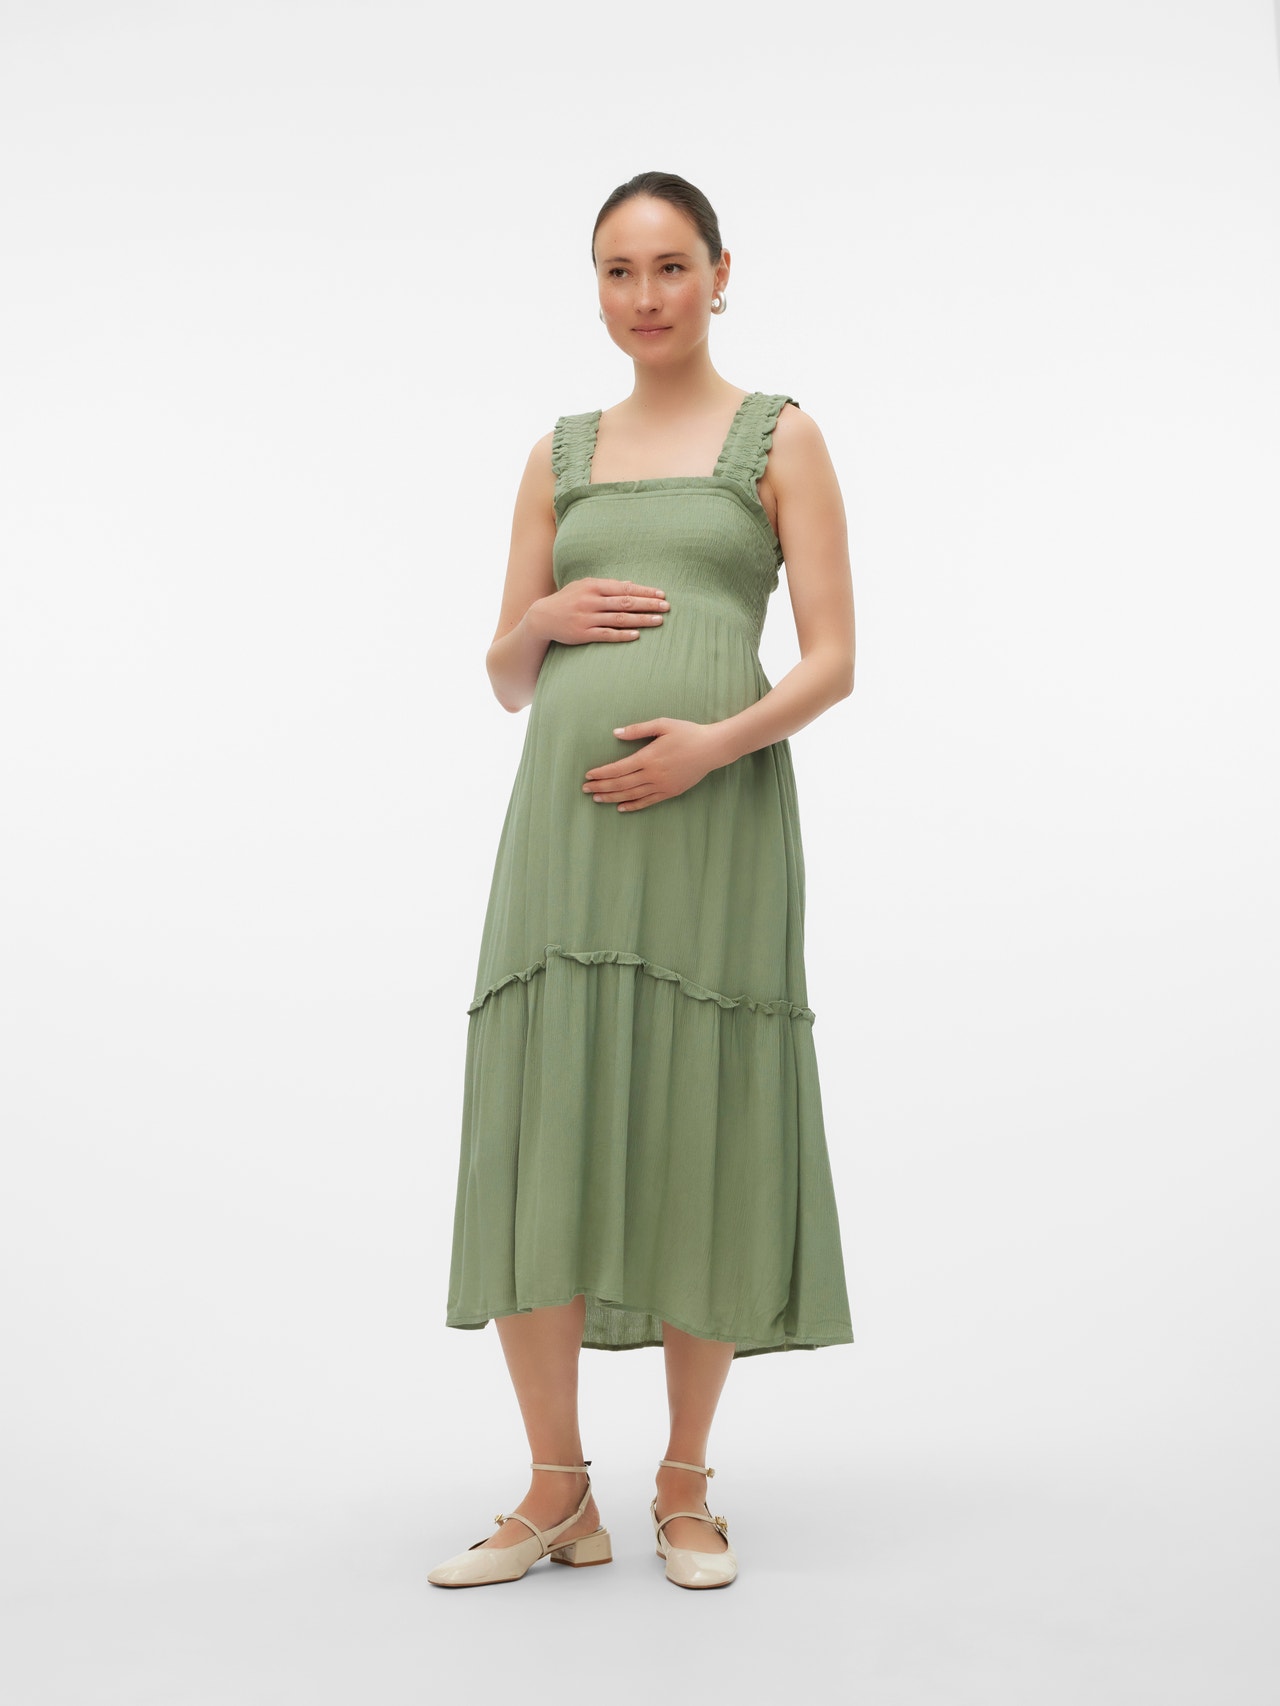 MAMA.LICIOUS Umstands-Kleid -Hedge Green - 20020567